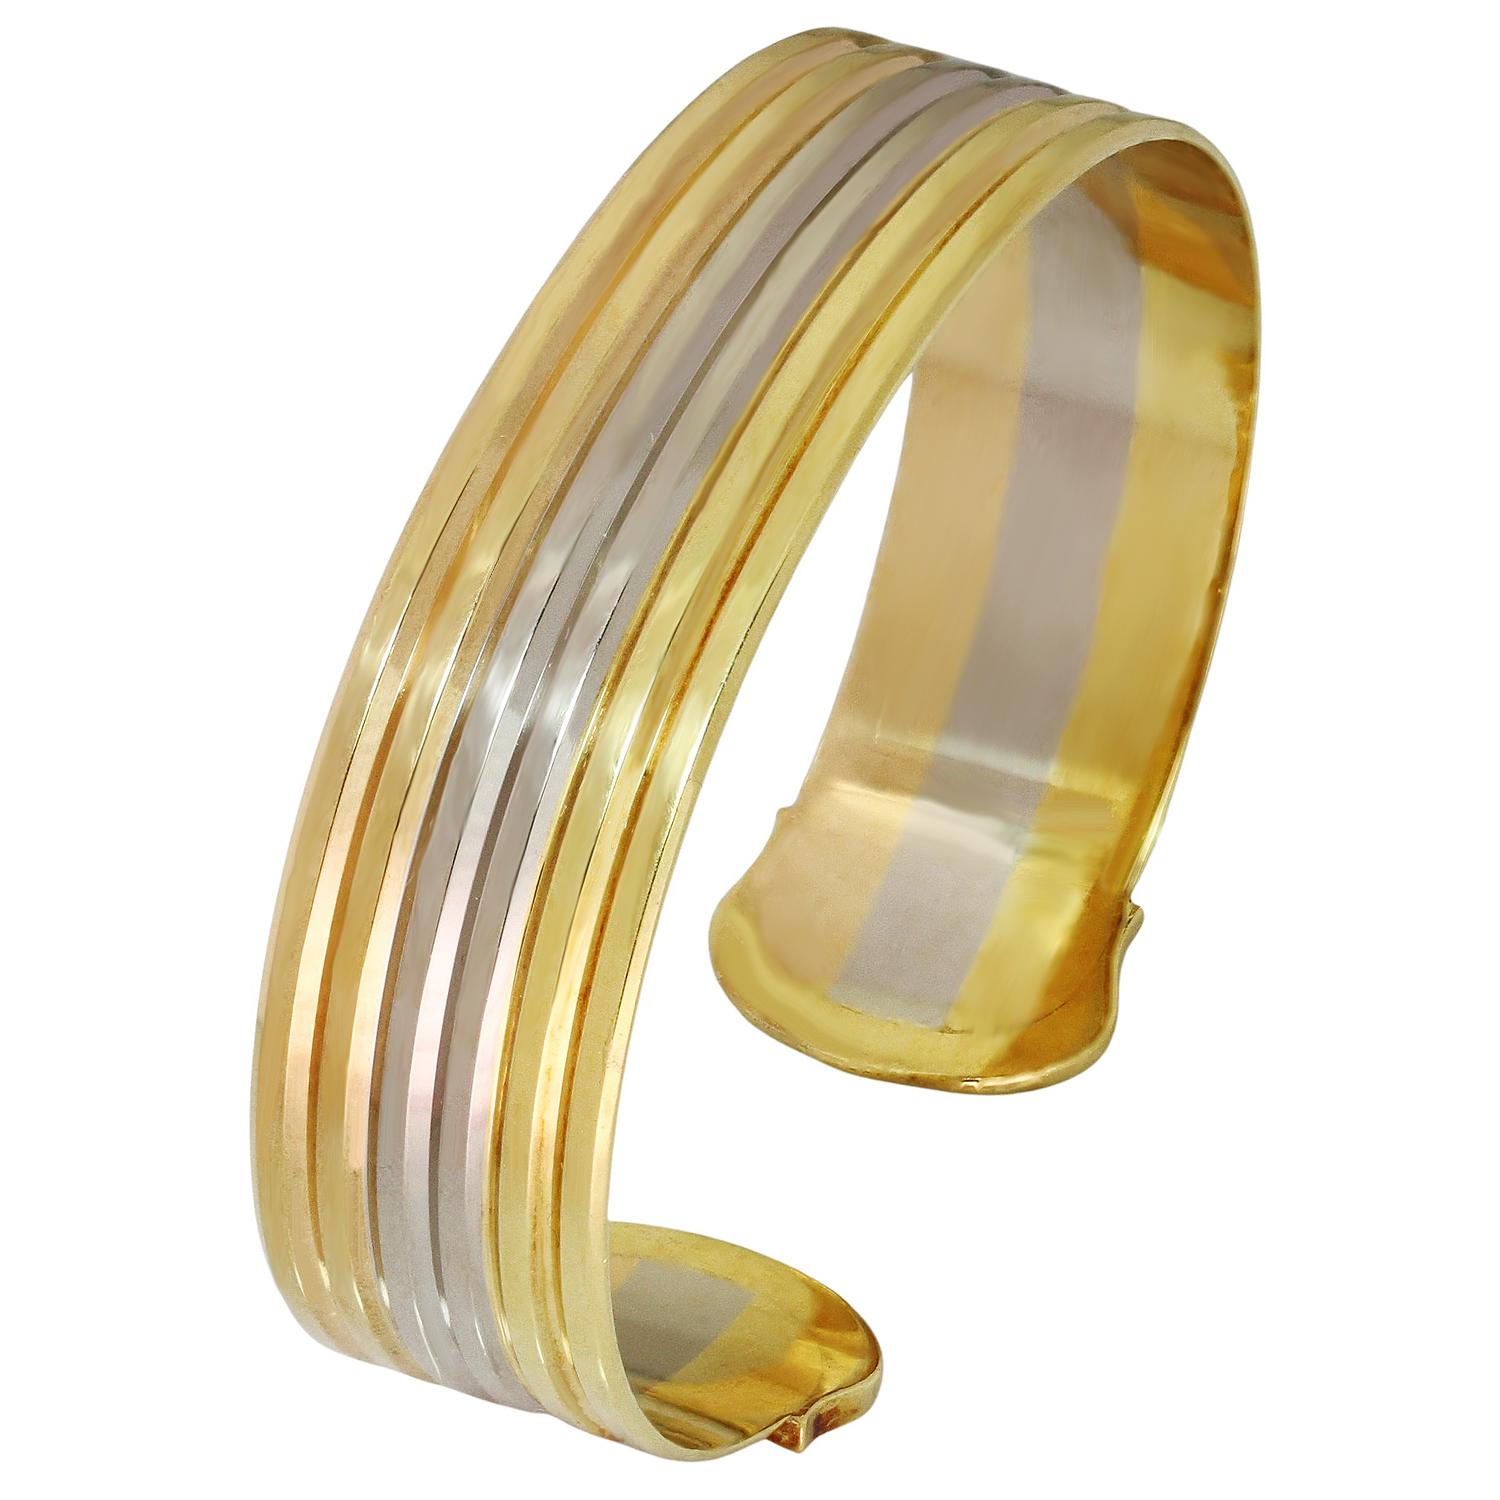 Cartier Double C 18k Tri-Gold Bangle Bracelet In Excellent Condition For Sale In New York, NY